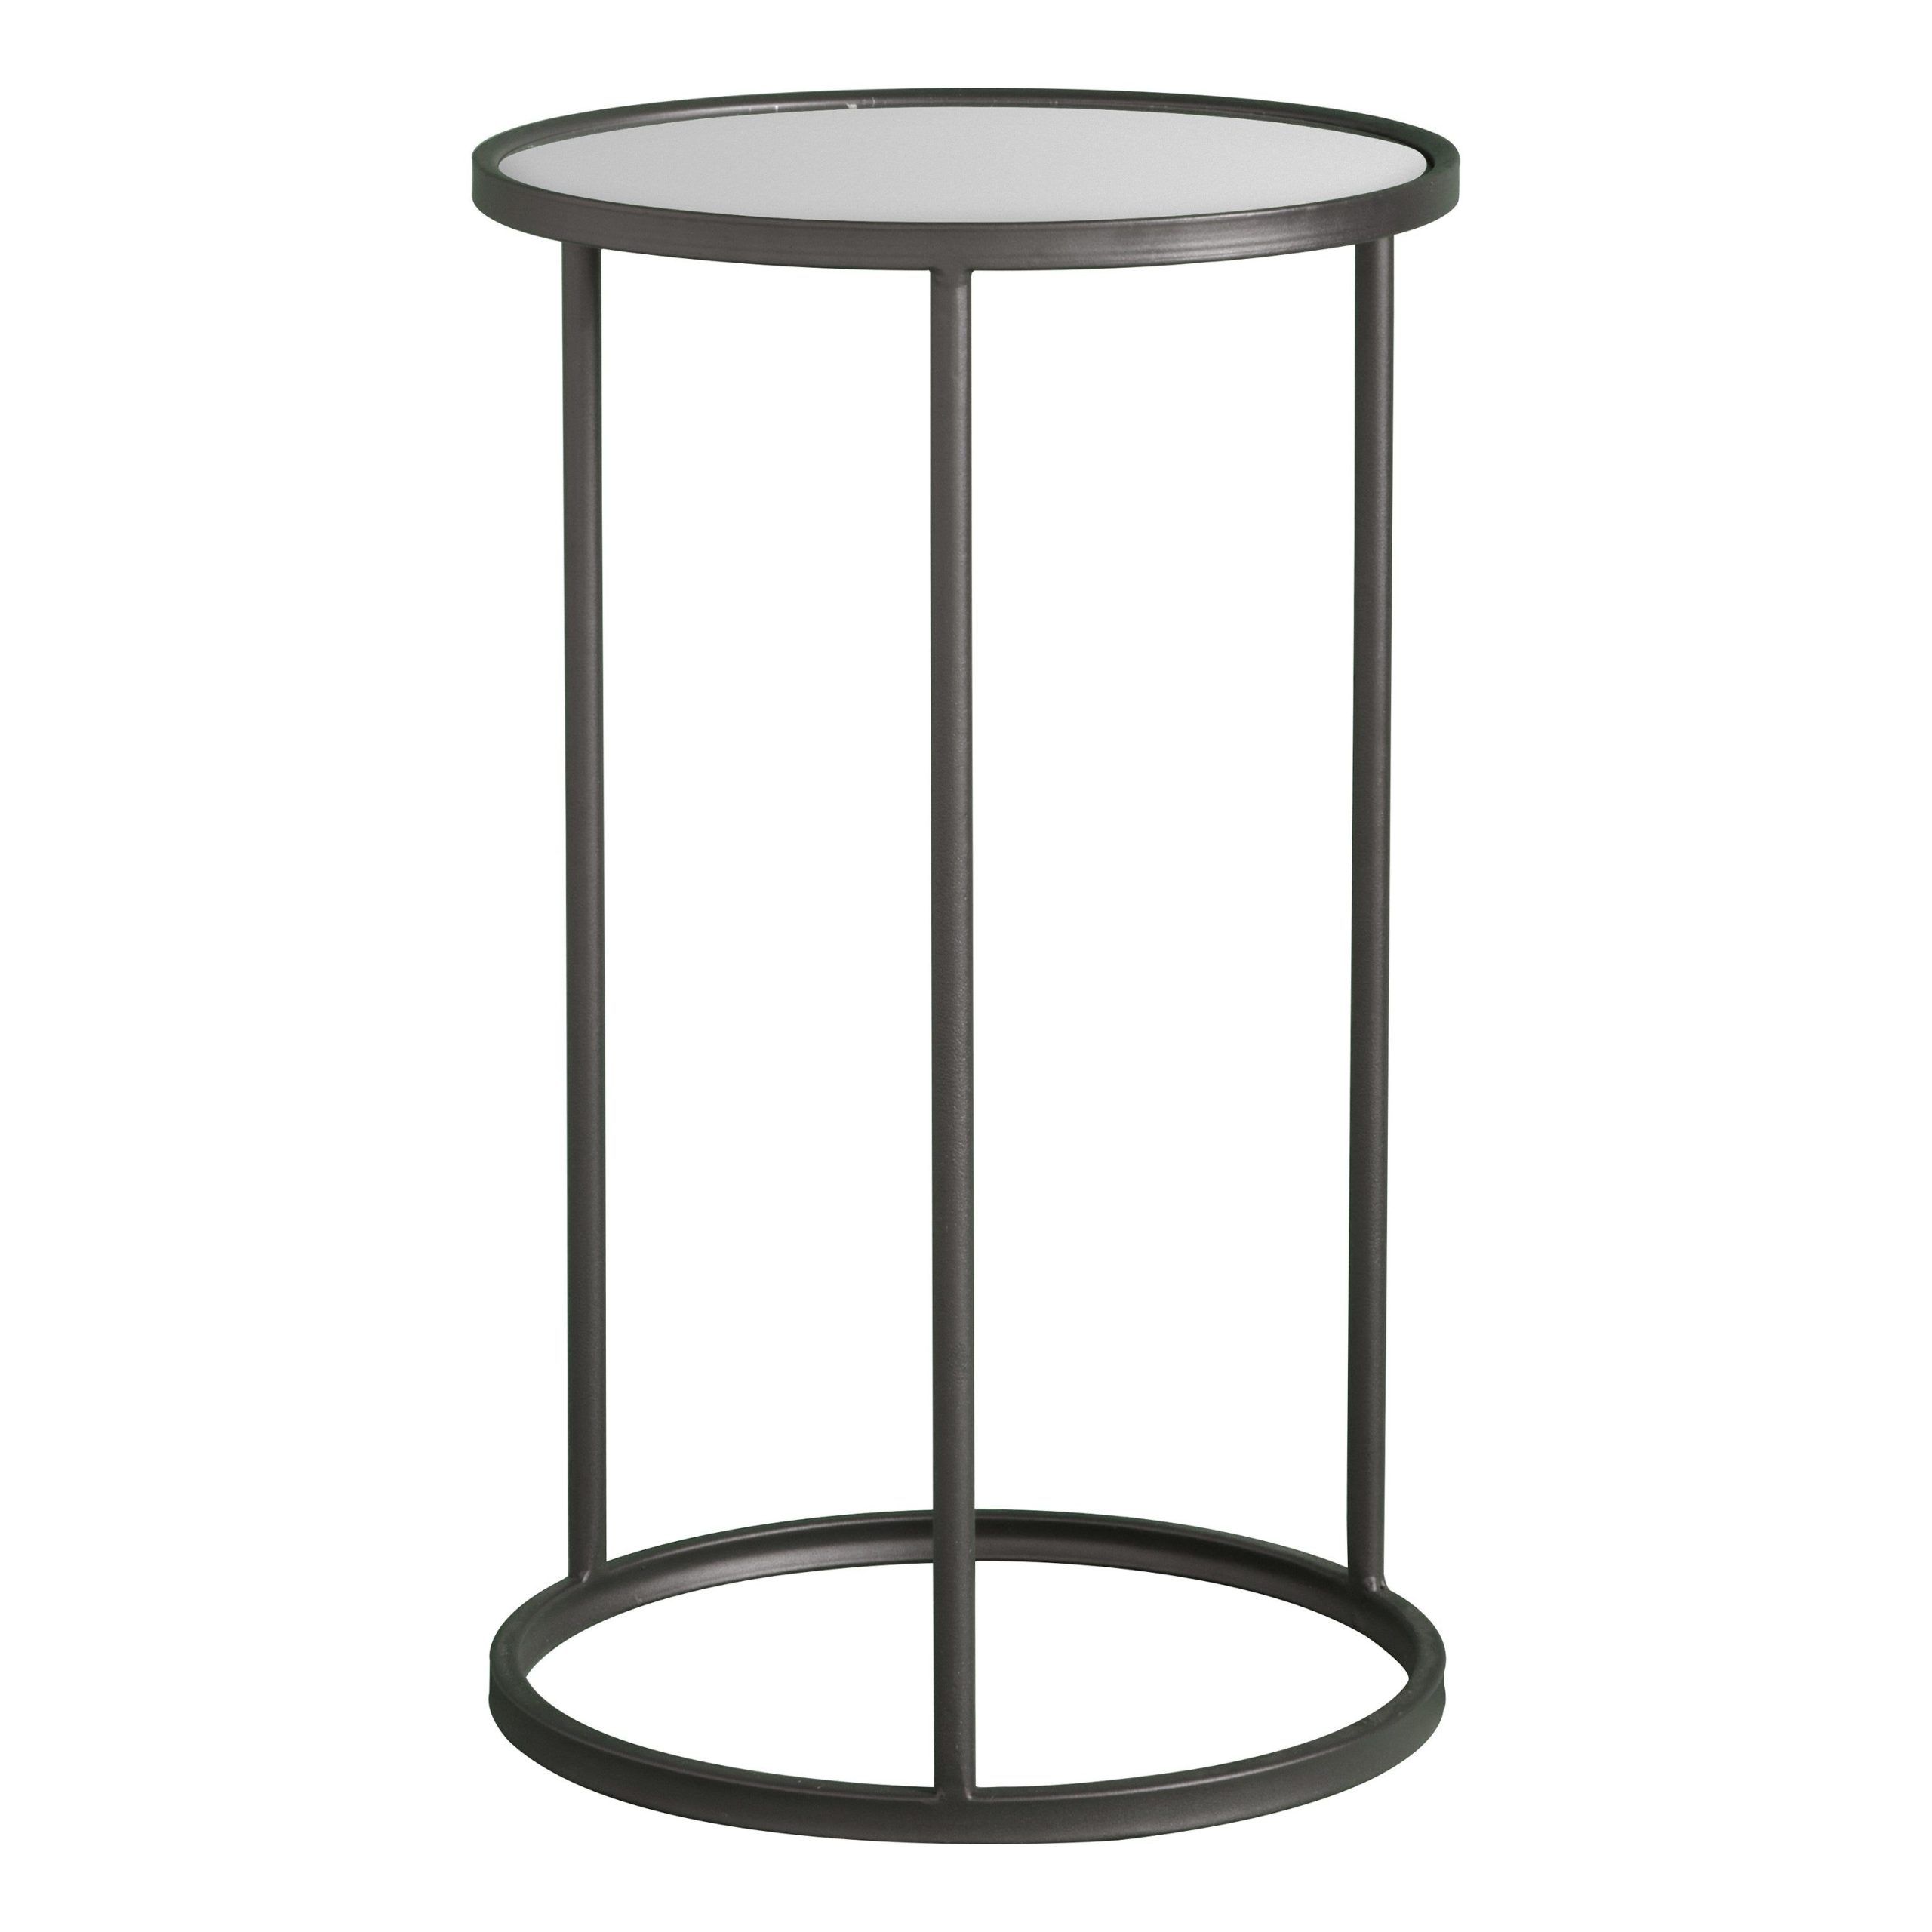 Huttone Side Table | Metal Side Table, Side Table, Mirror Side Table Intended For Metal Side Tables For Living Spaces (Gallery 5 of 20)